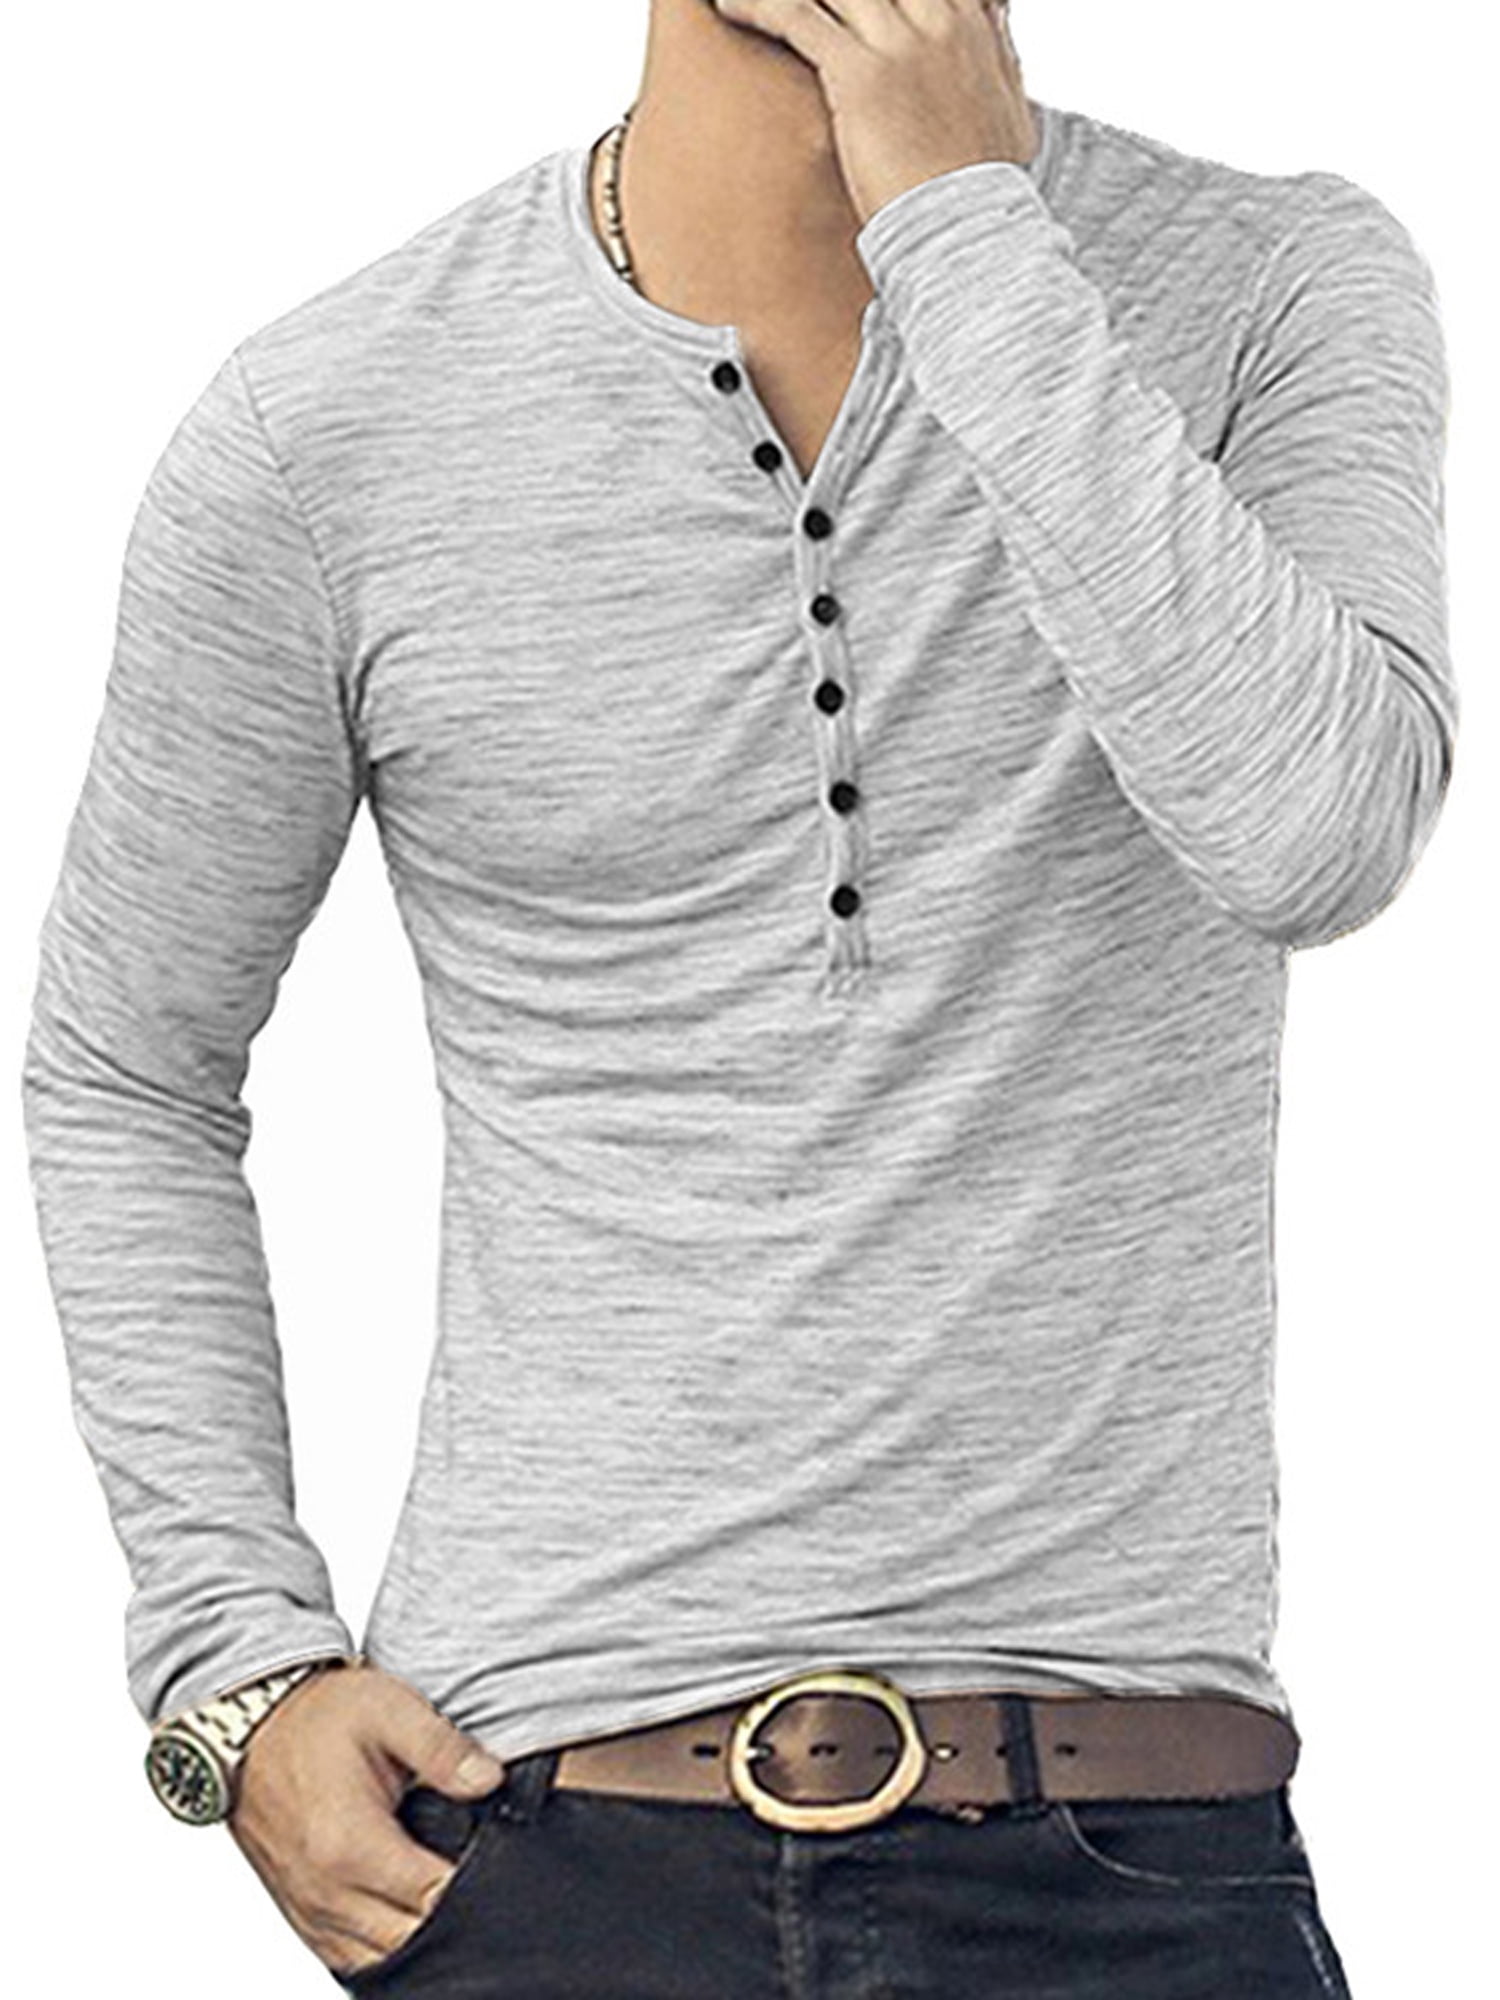 Mens Slim Fit V Neck Long Sleeve Muscle Tee T Shirt Casual Tops Henley Shirts 